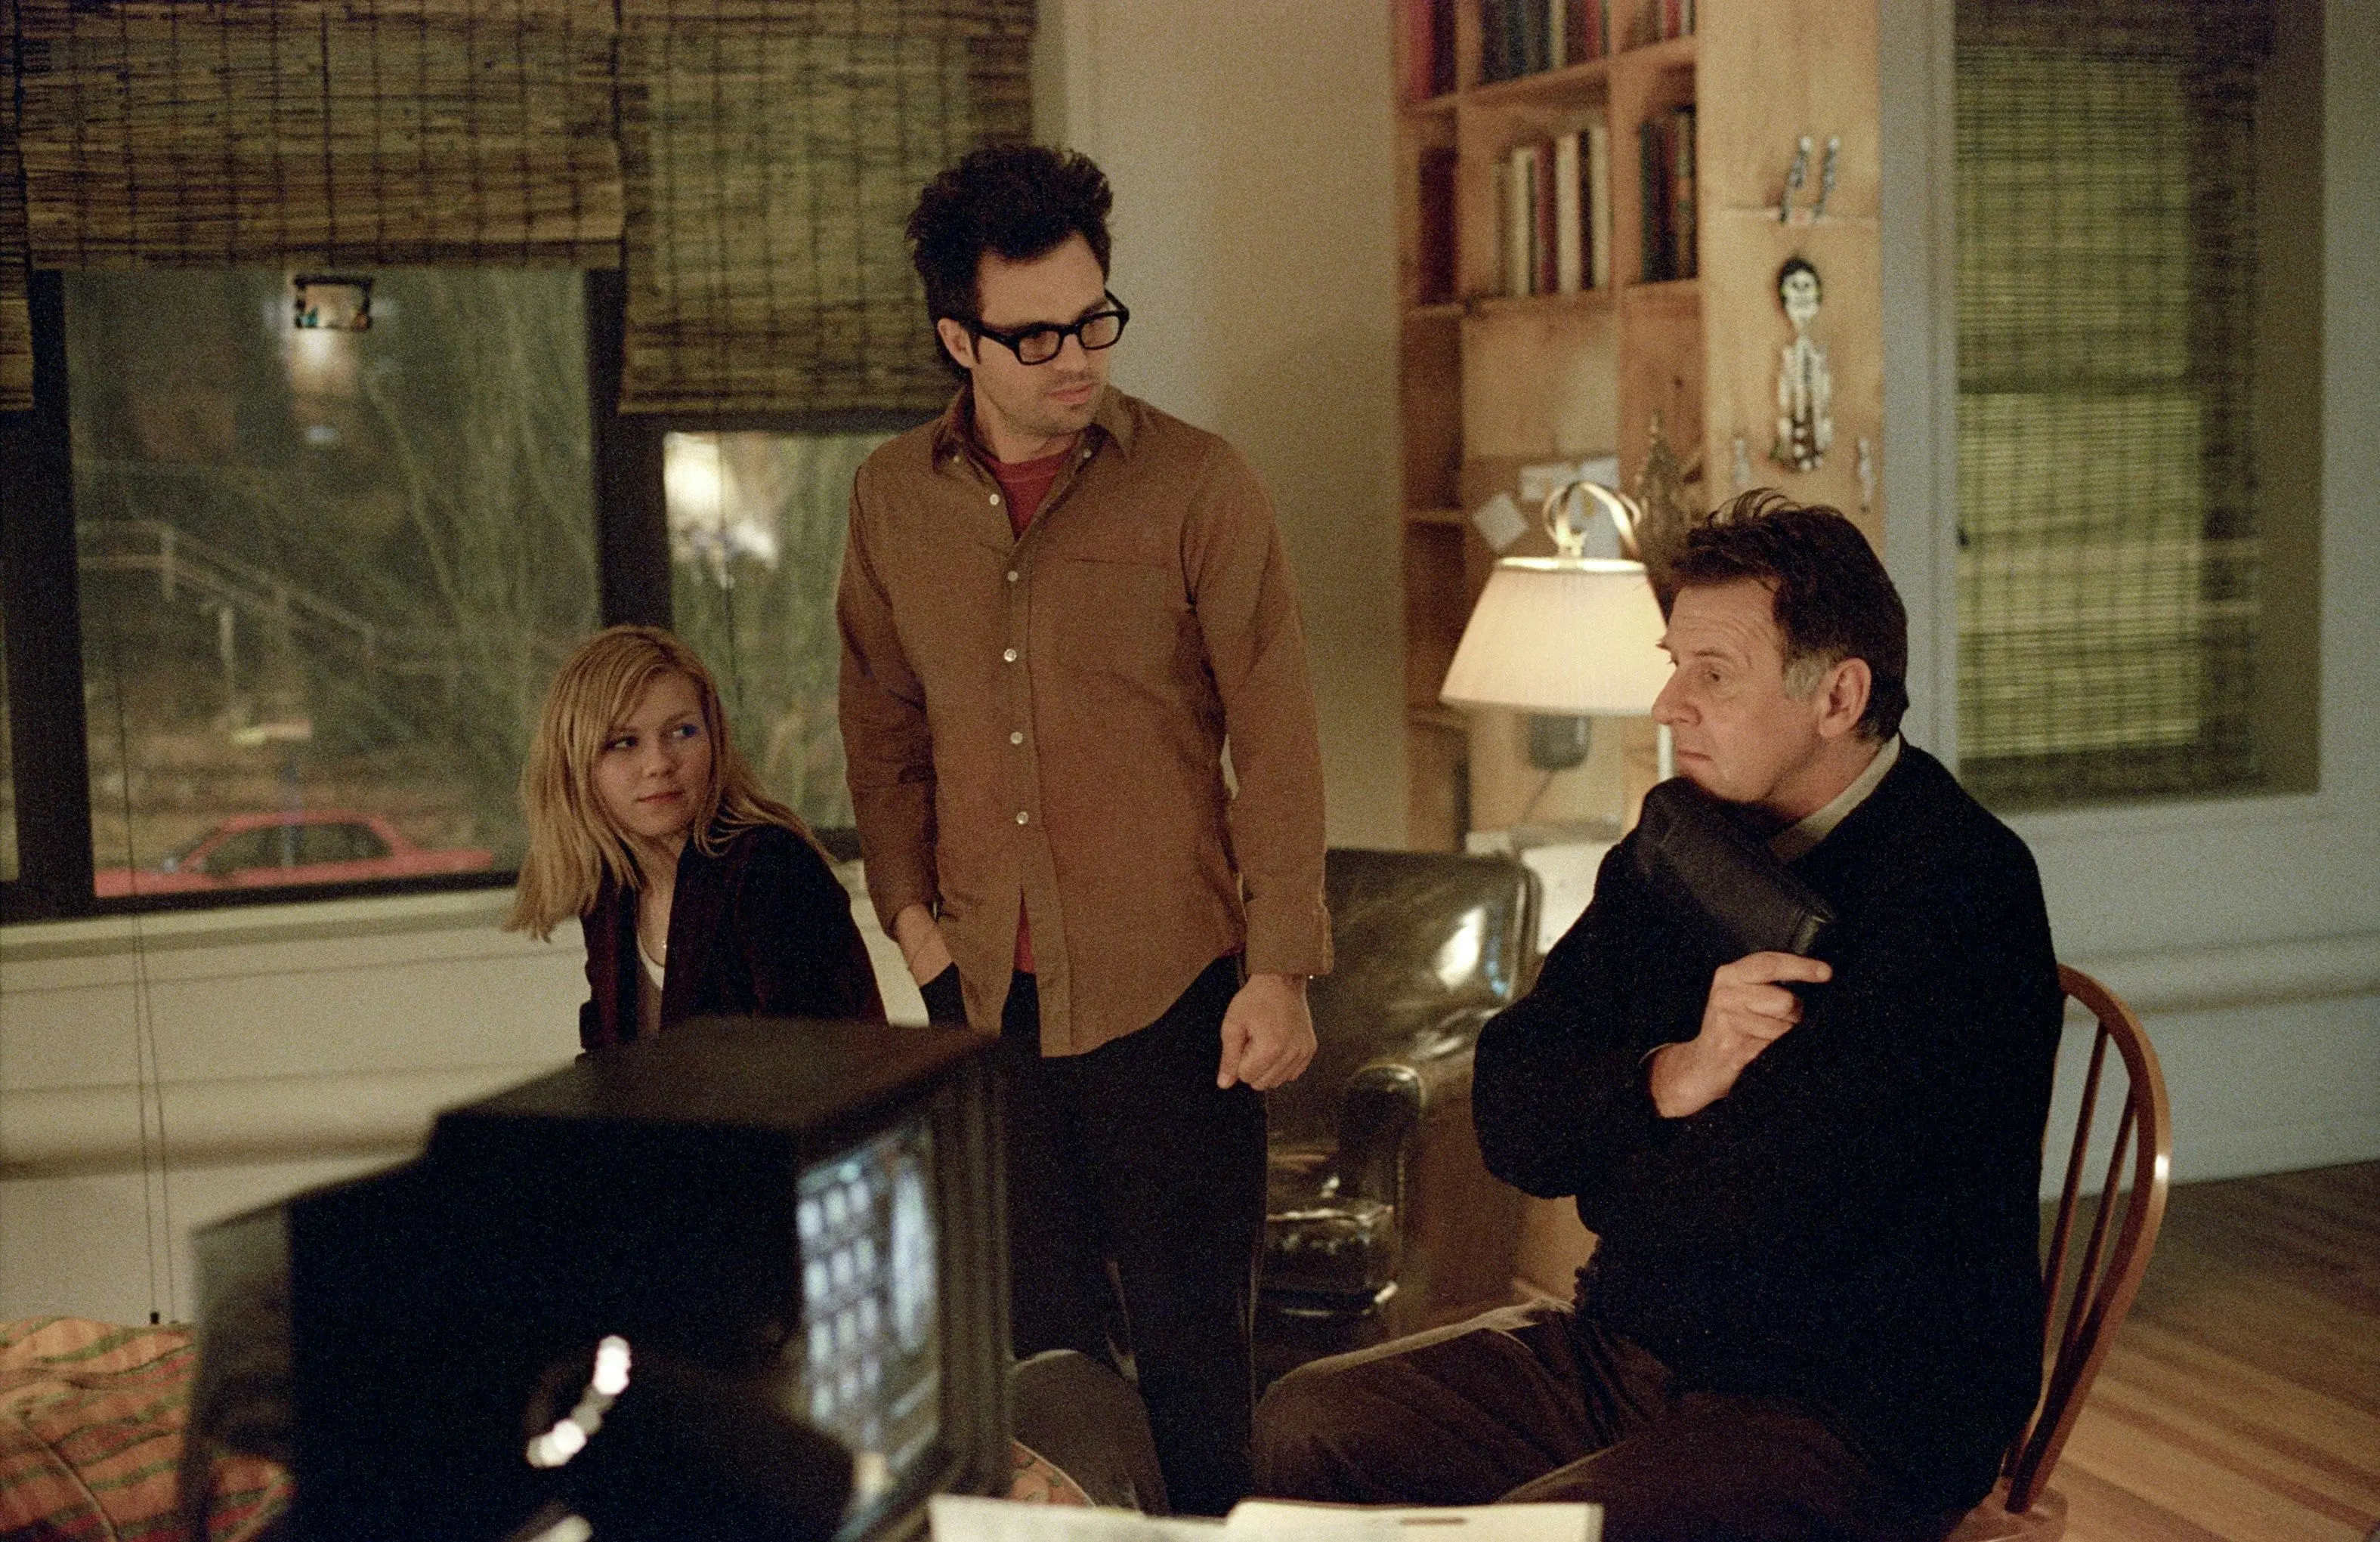 Kirsten Dunst as Mary, Mark Ruffalo as Stan Fink and Tom Wilkinson as Dr. Mierzwiak